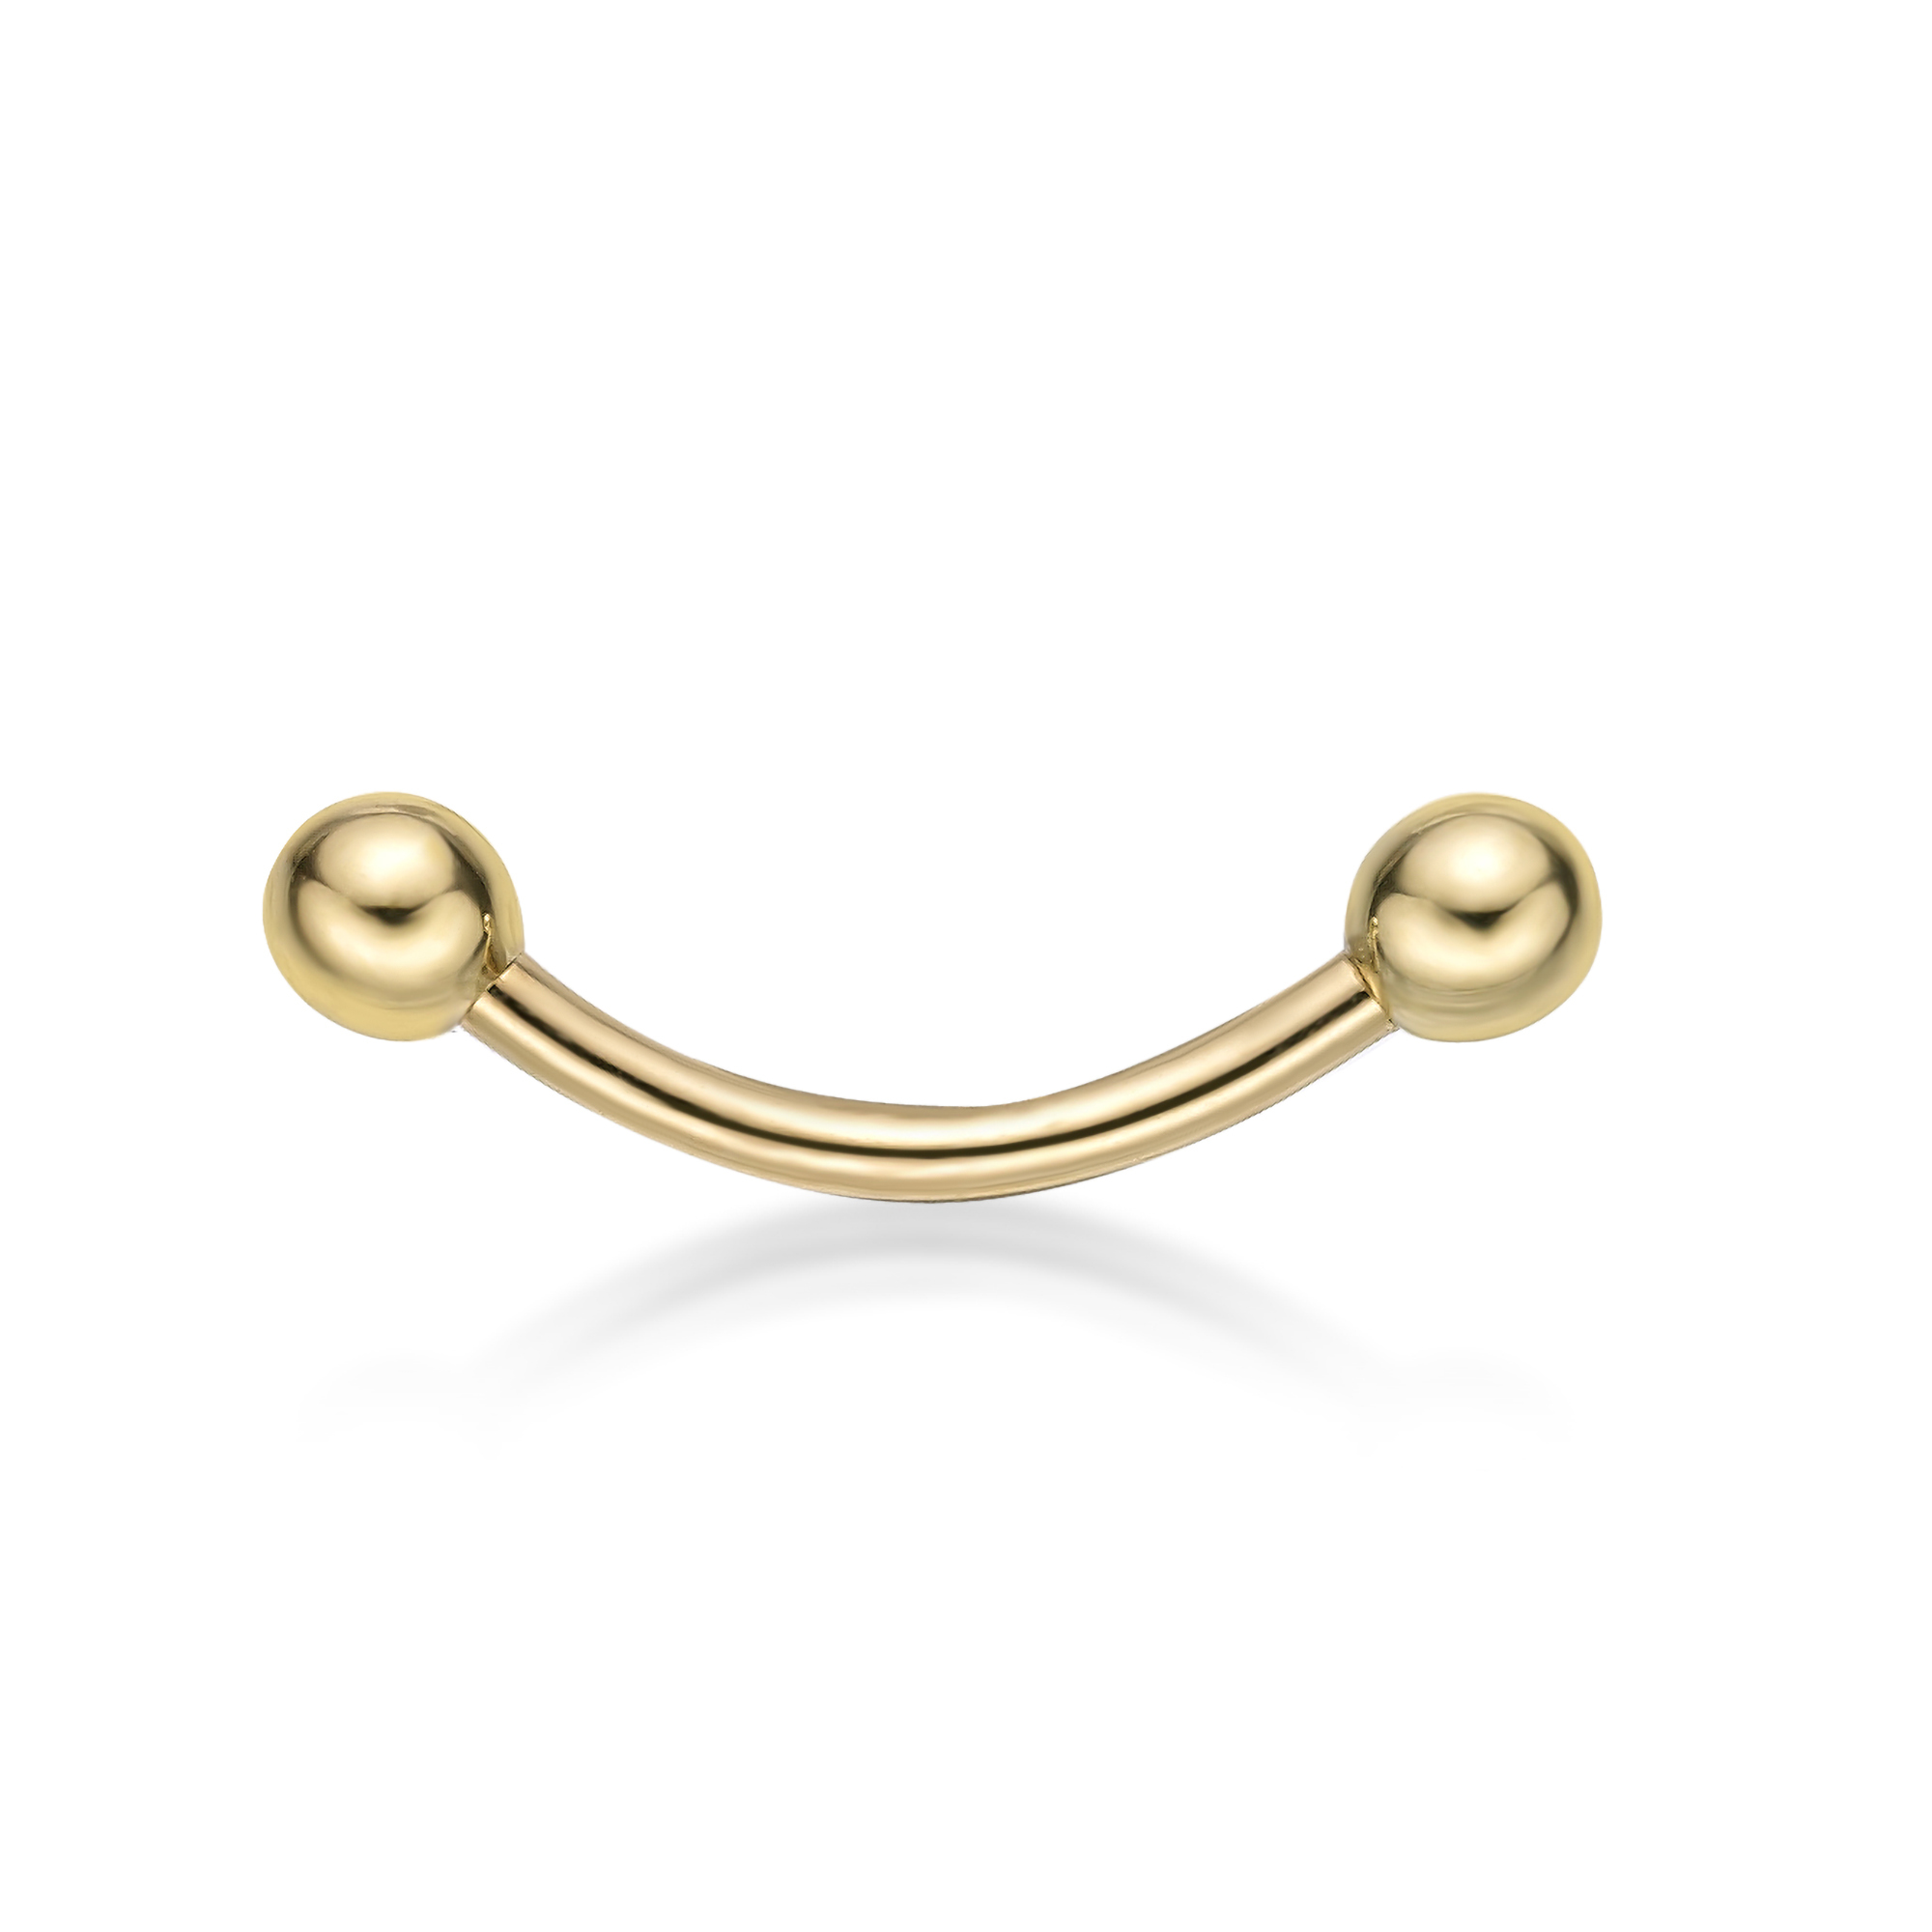 16 Gauge 14K Yellow Gold Curved Barbell Eyebrow Ring, 3/8